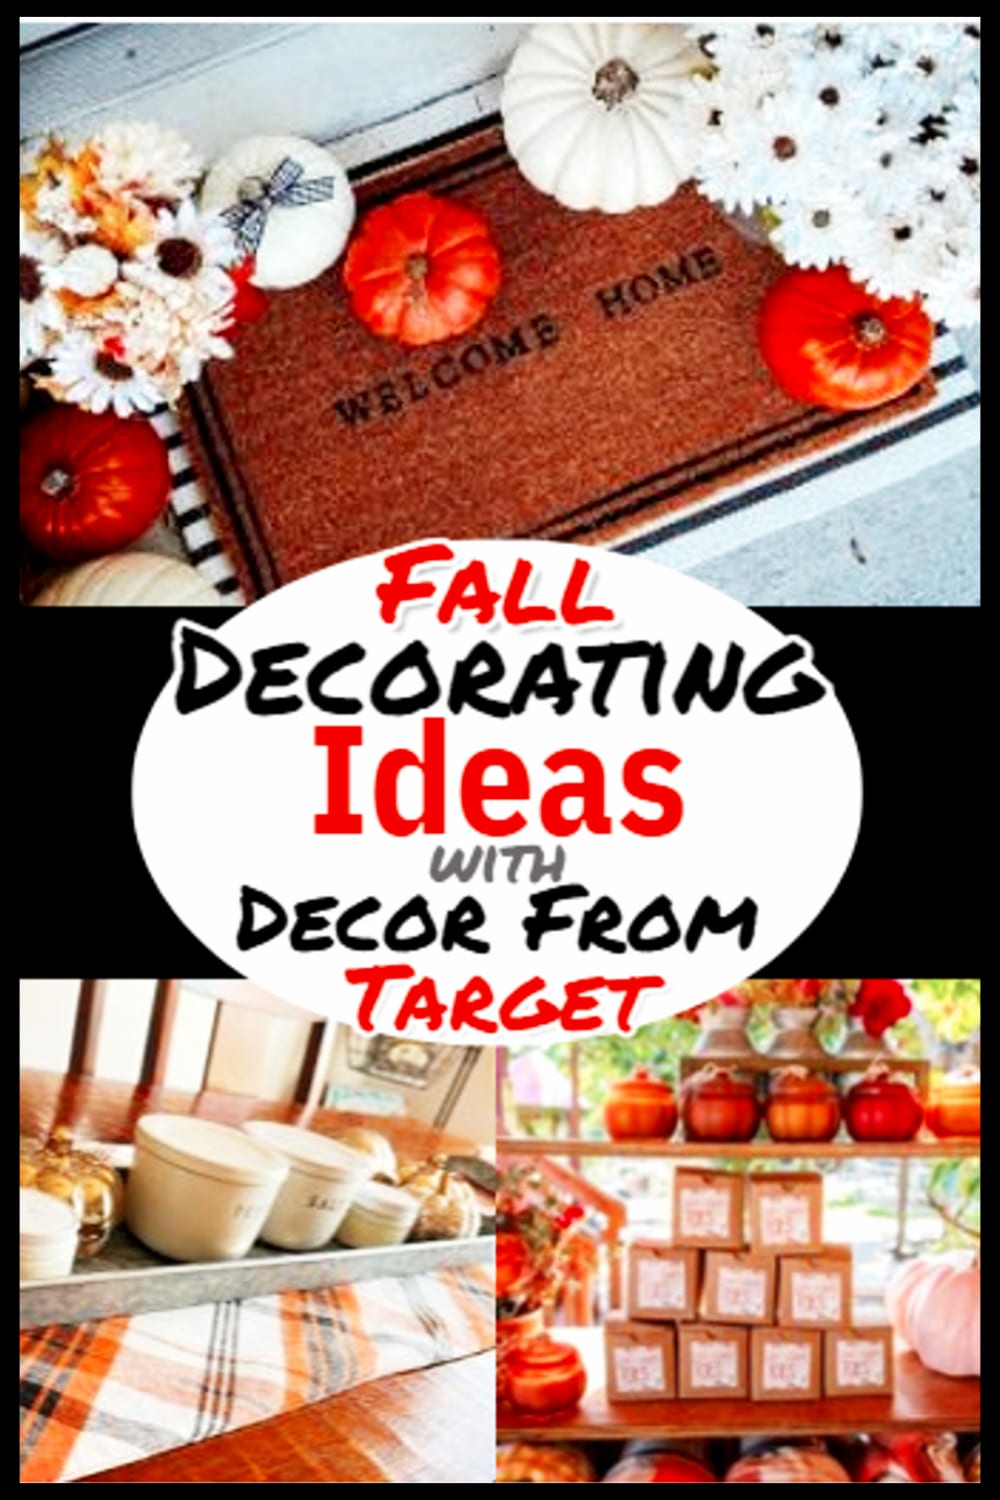 Fall decorating ideas with budget-friendly decor items from Target